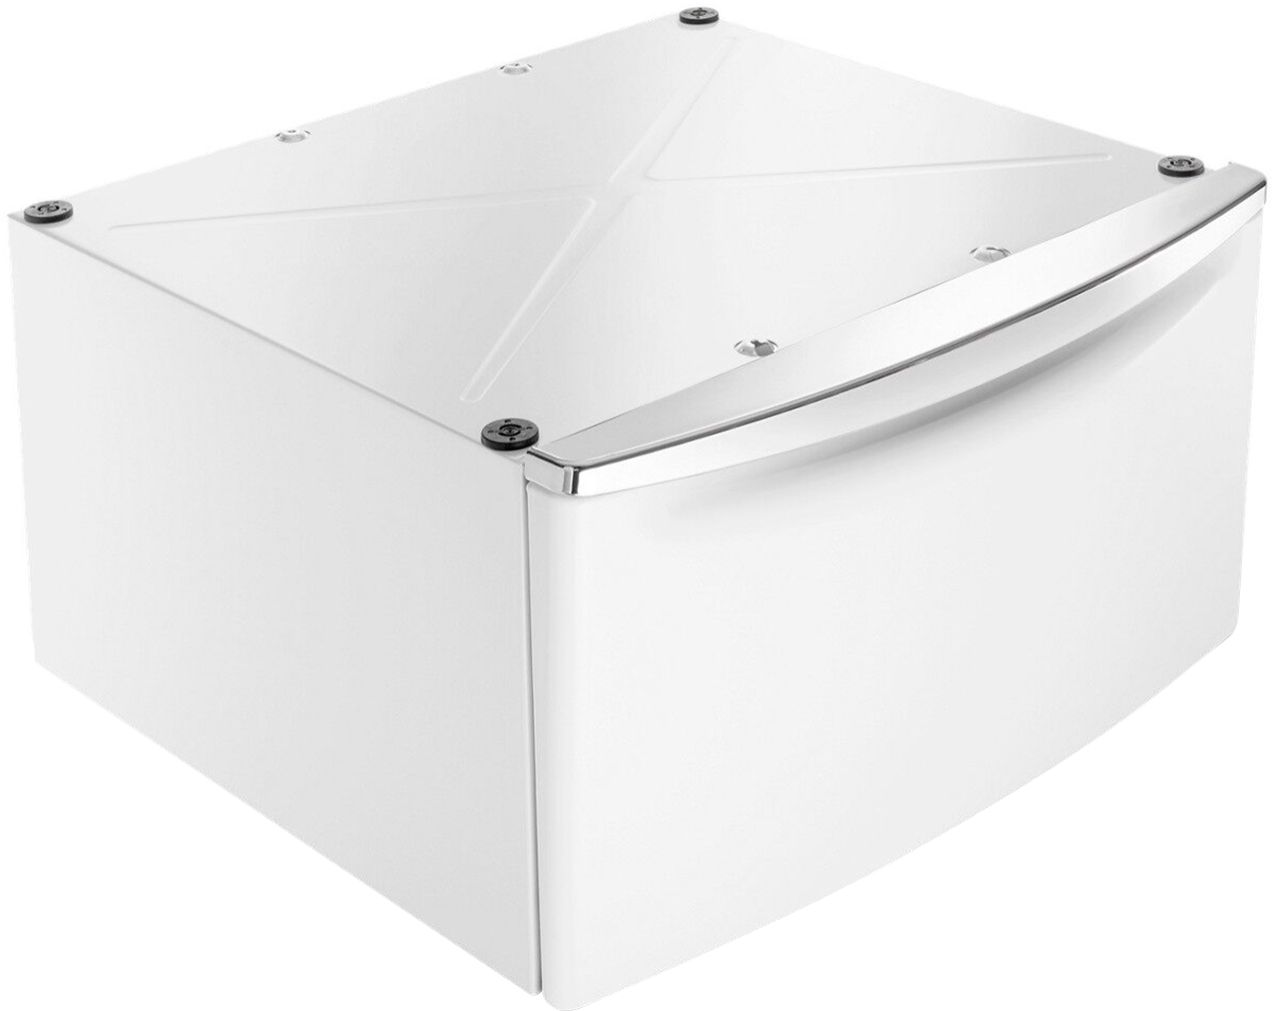 Angle View: Maytag - Washer/Dryer Laundry Pedestal with Storage Drawer - White